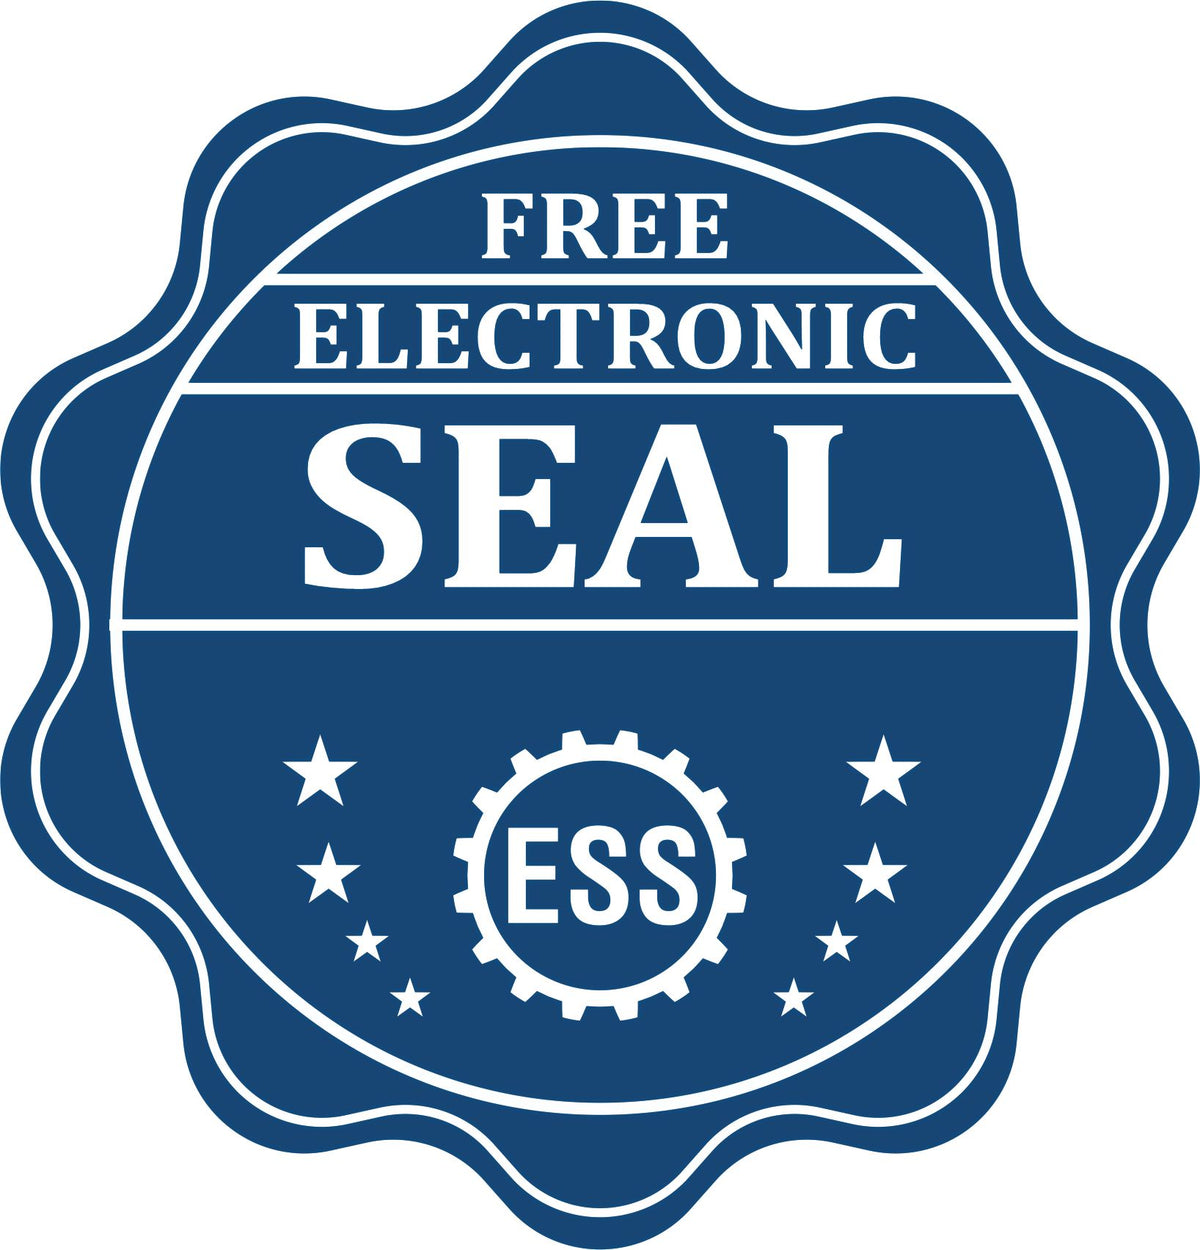 A badge showing a free electronic seal for the Long Reach Missouri PE Seal with stars and the ESS gear on the emblem.